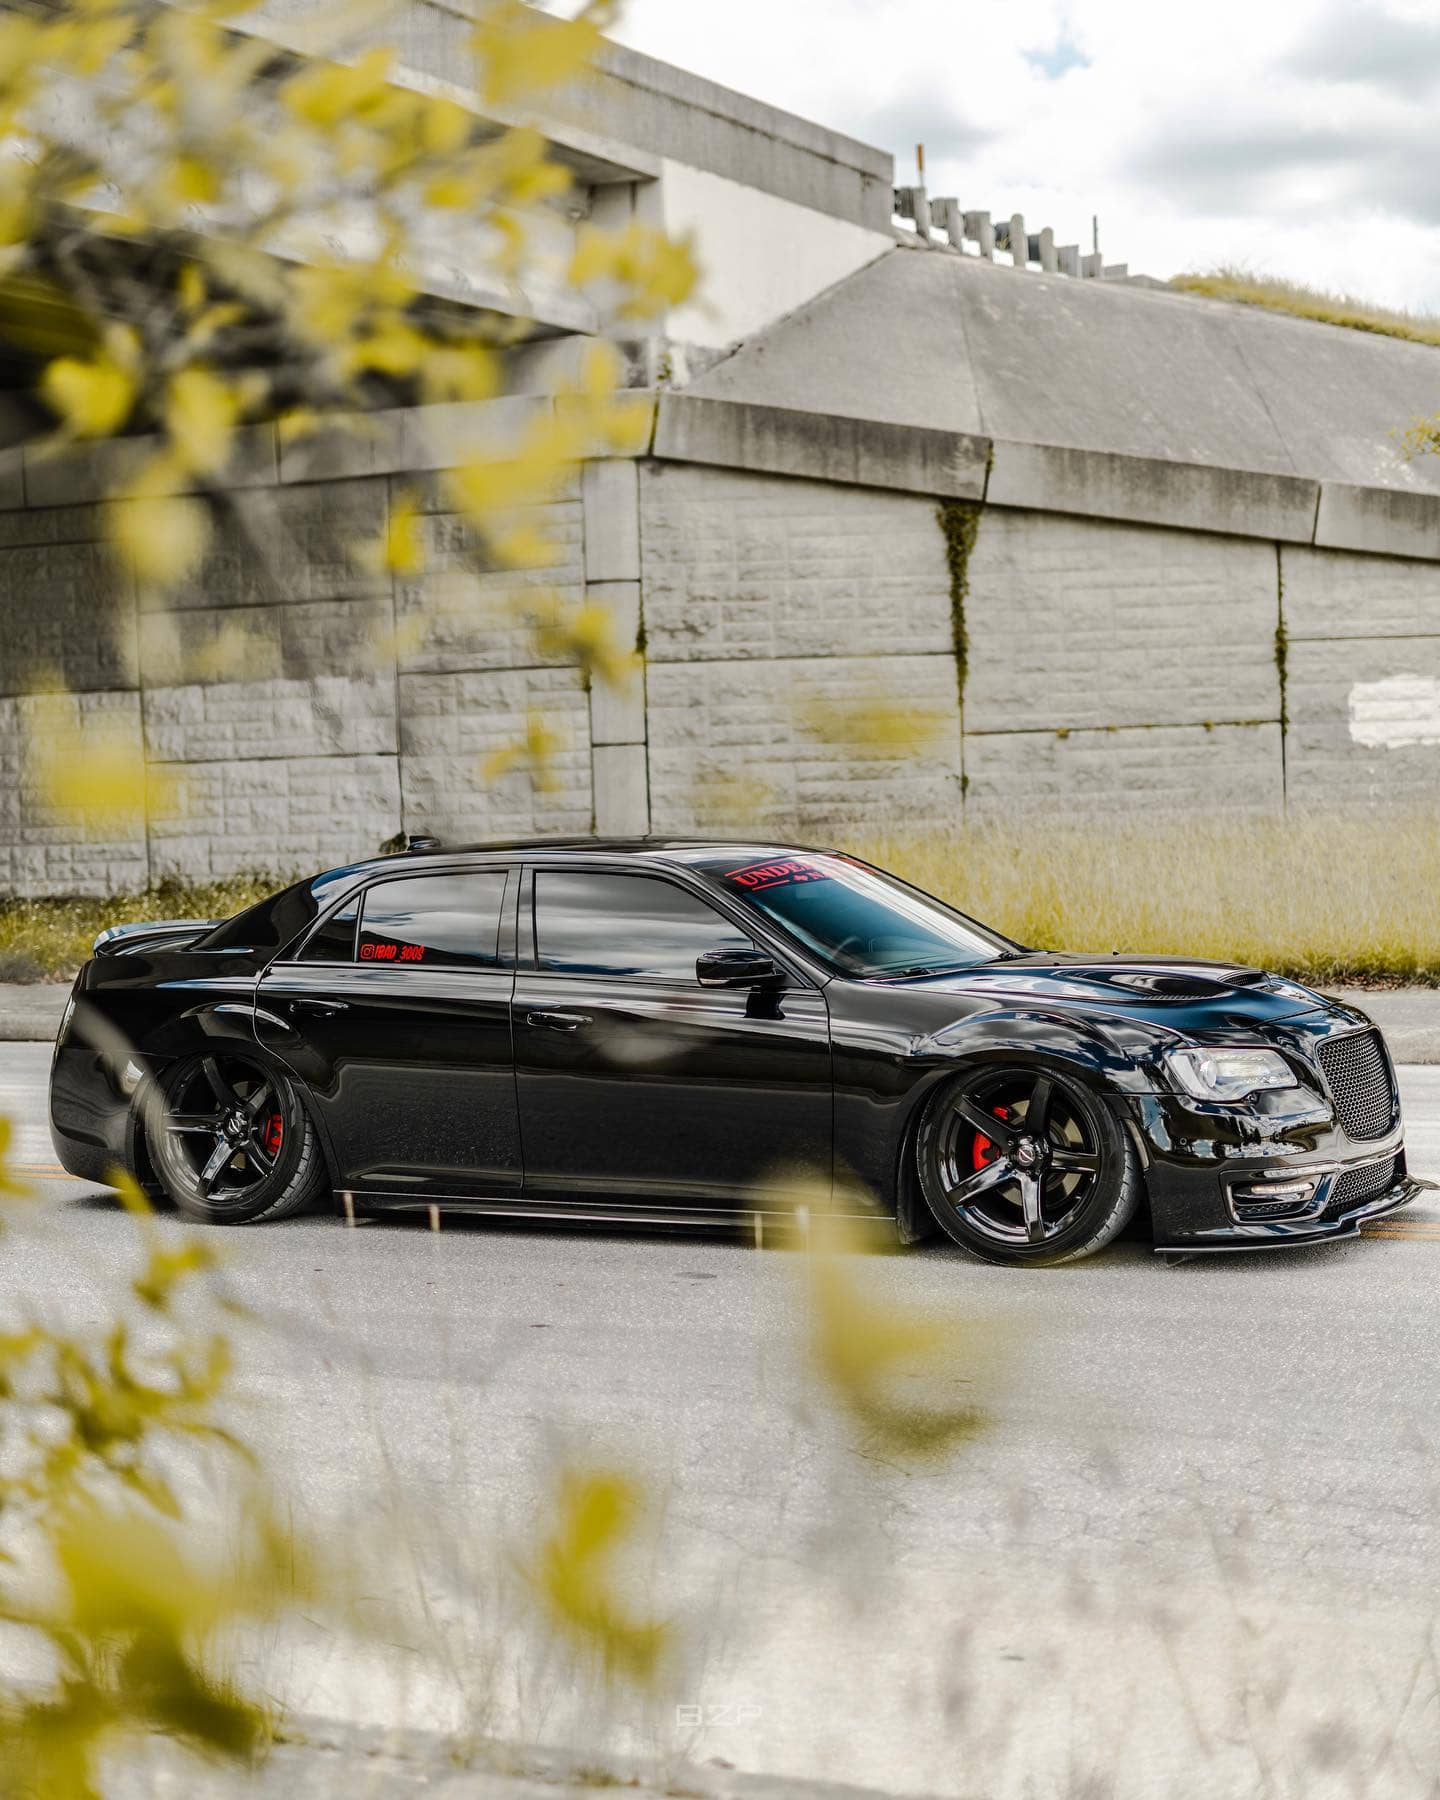 Beneath the chassis, the AirLift Air Suspension provides the 300S with that bagged VIP-style stance.